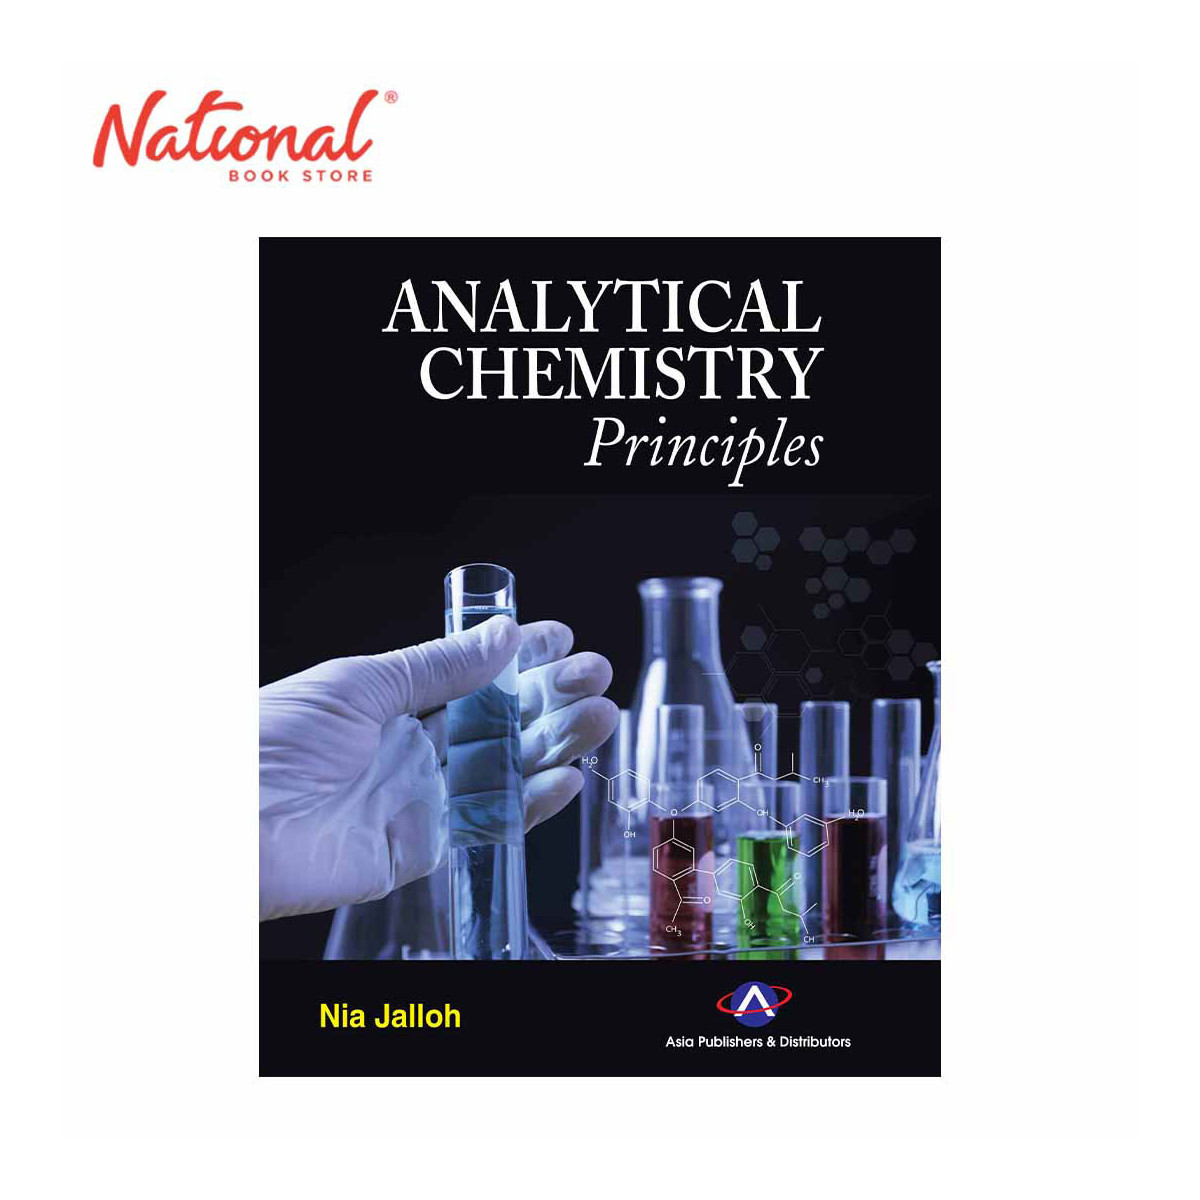 Analytical Chemistry Principles by Nia Jalloh - Trade Paperback - College - Science